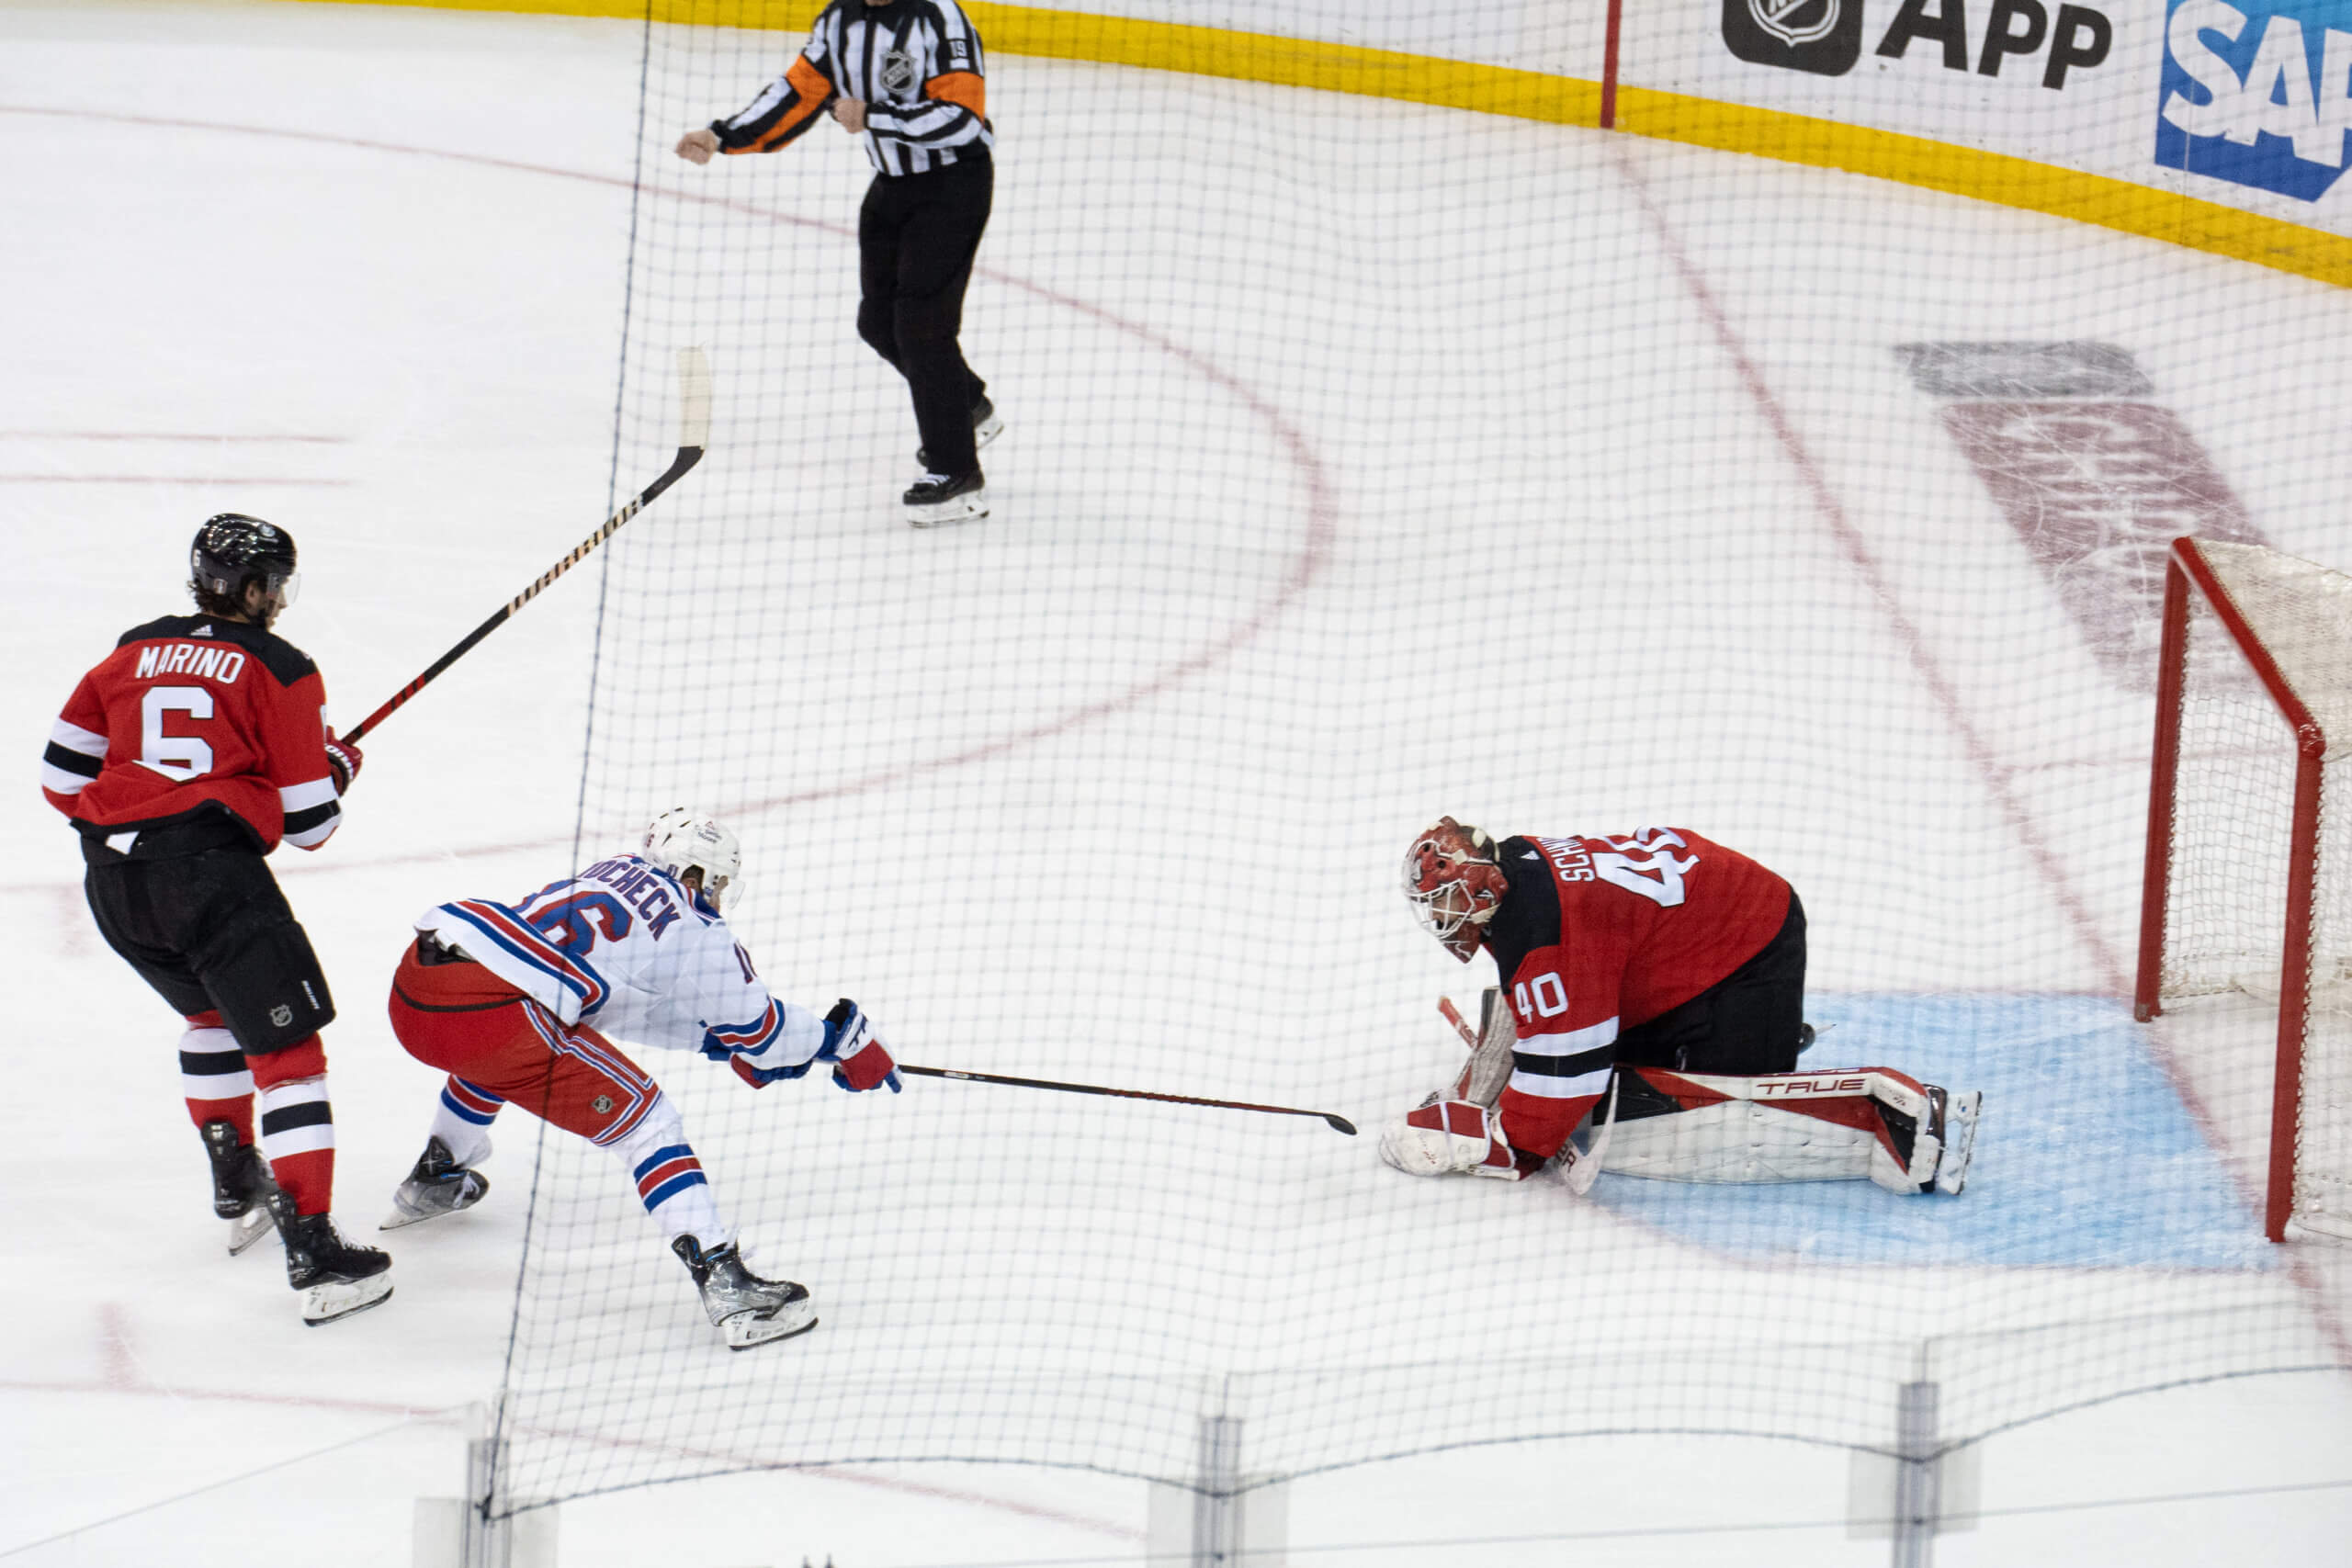 Devils goaltender Akira Schmid covers up the puck as Rangers forward Vincent Trocheck tries to poke at it during Game 7 of the first round of the Stanley Cup Playoffs on May 1, 2023.